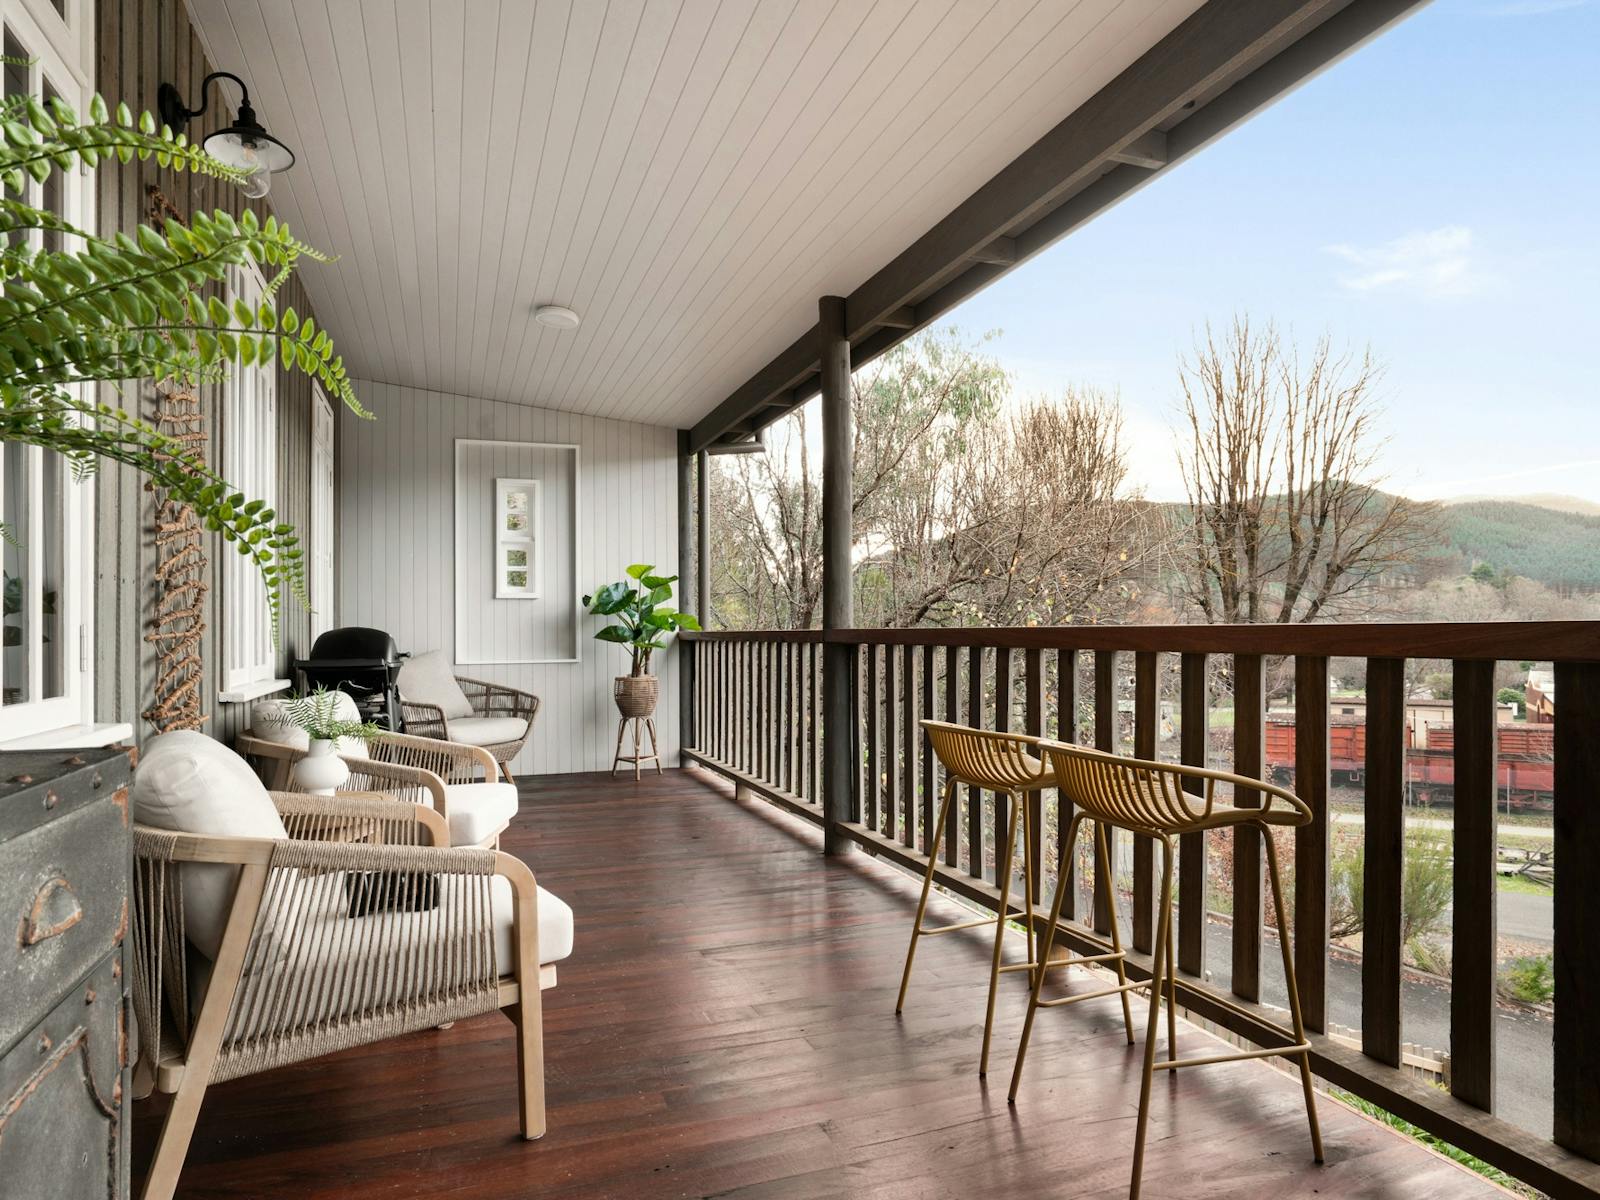 The wide balcony for taking in the stunning views